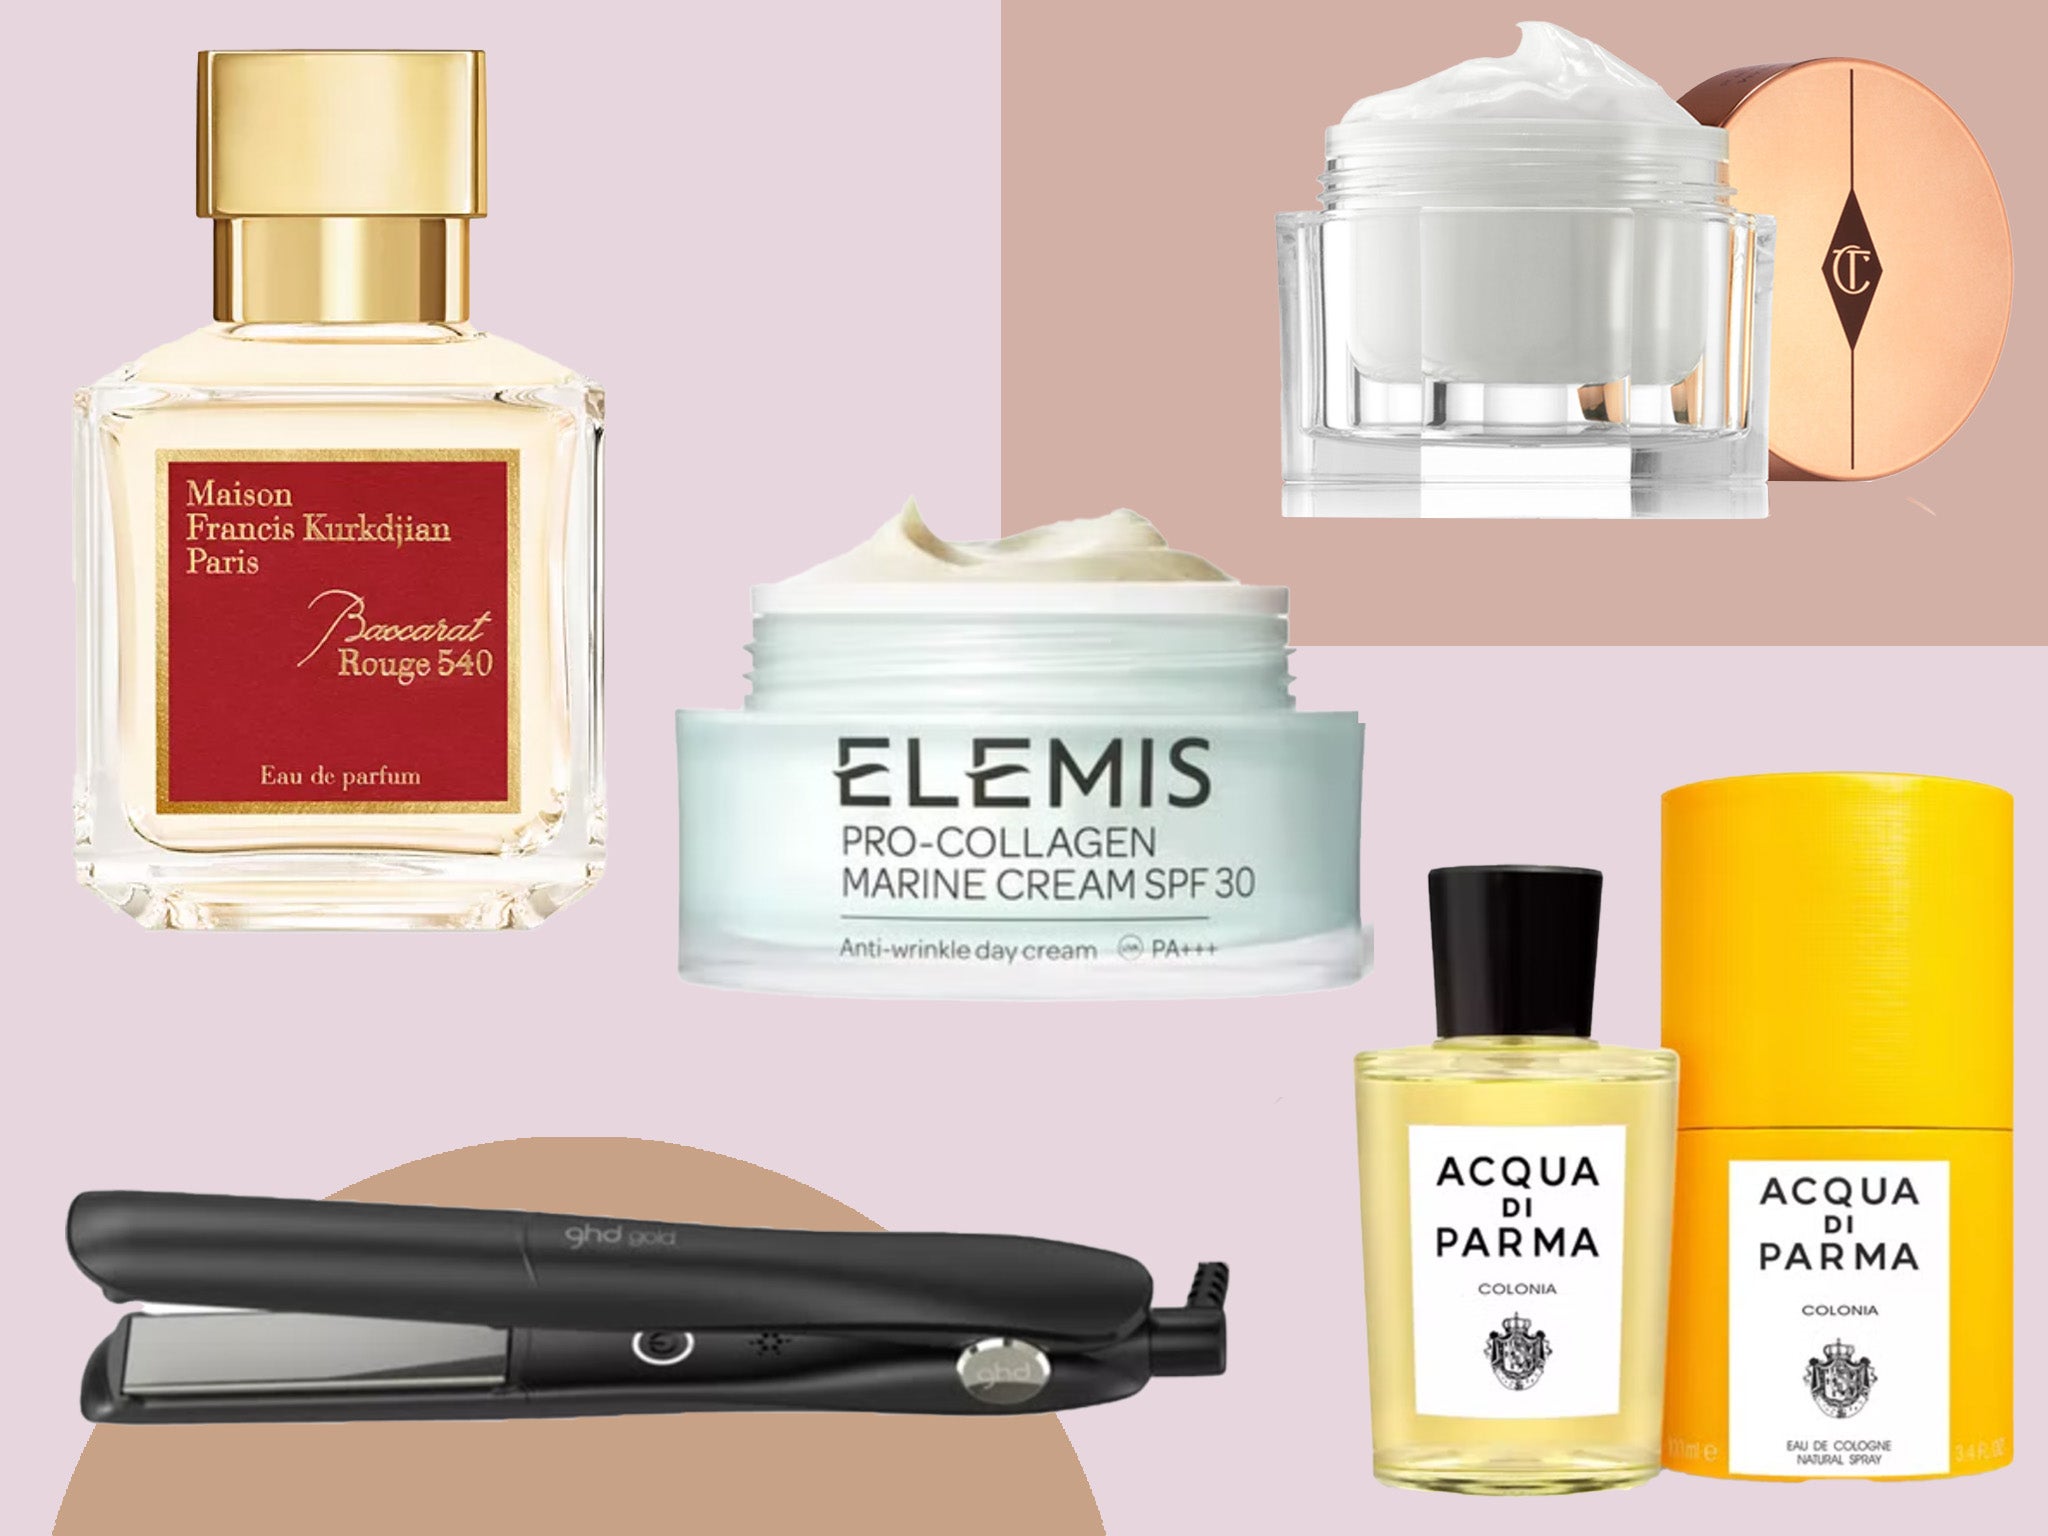 Black Friday beauty deals 2022: Best make-up, skincare and perfume offers